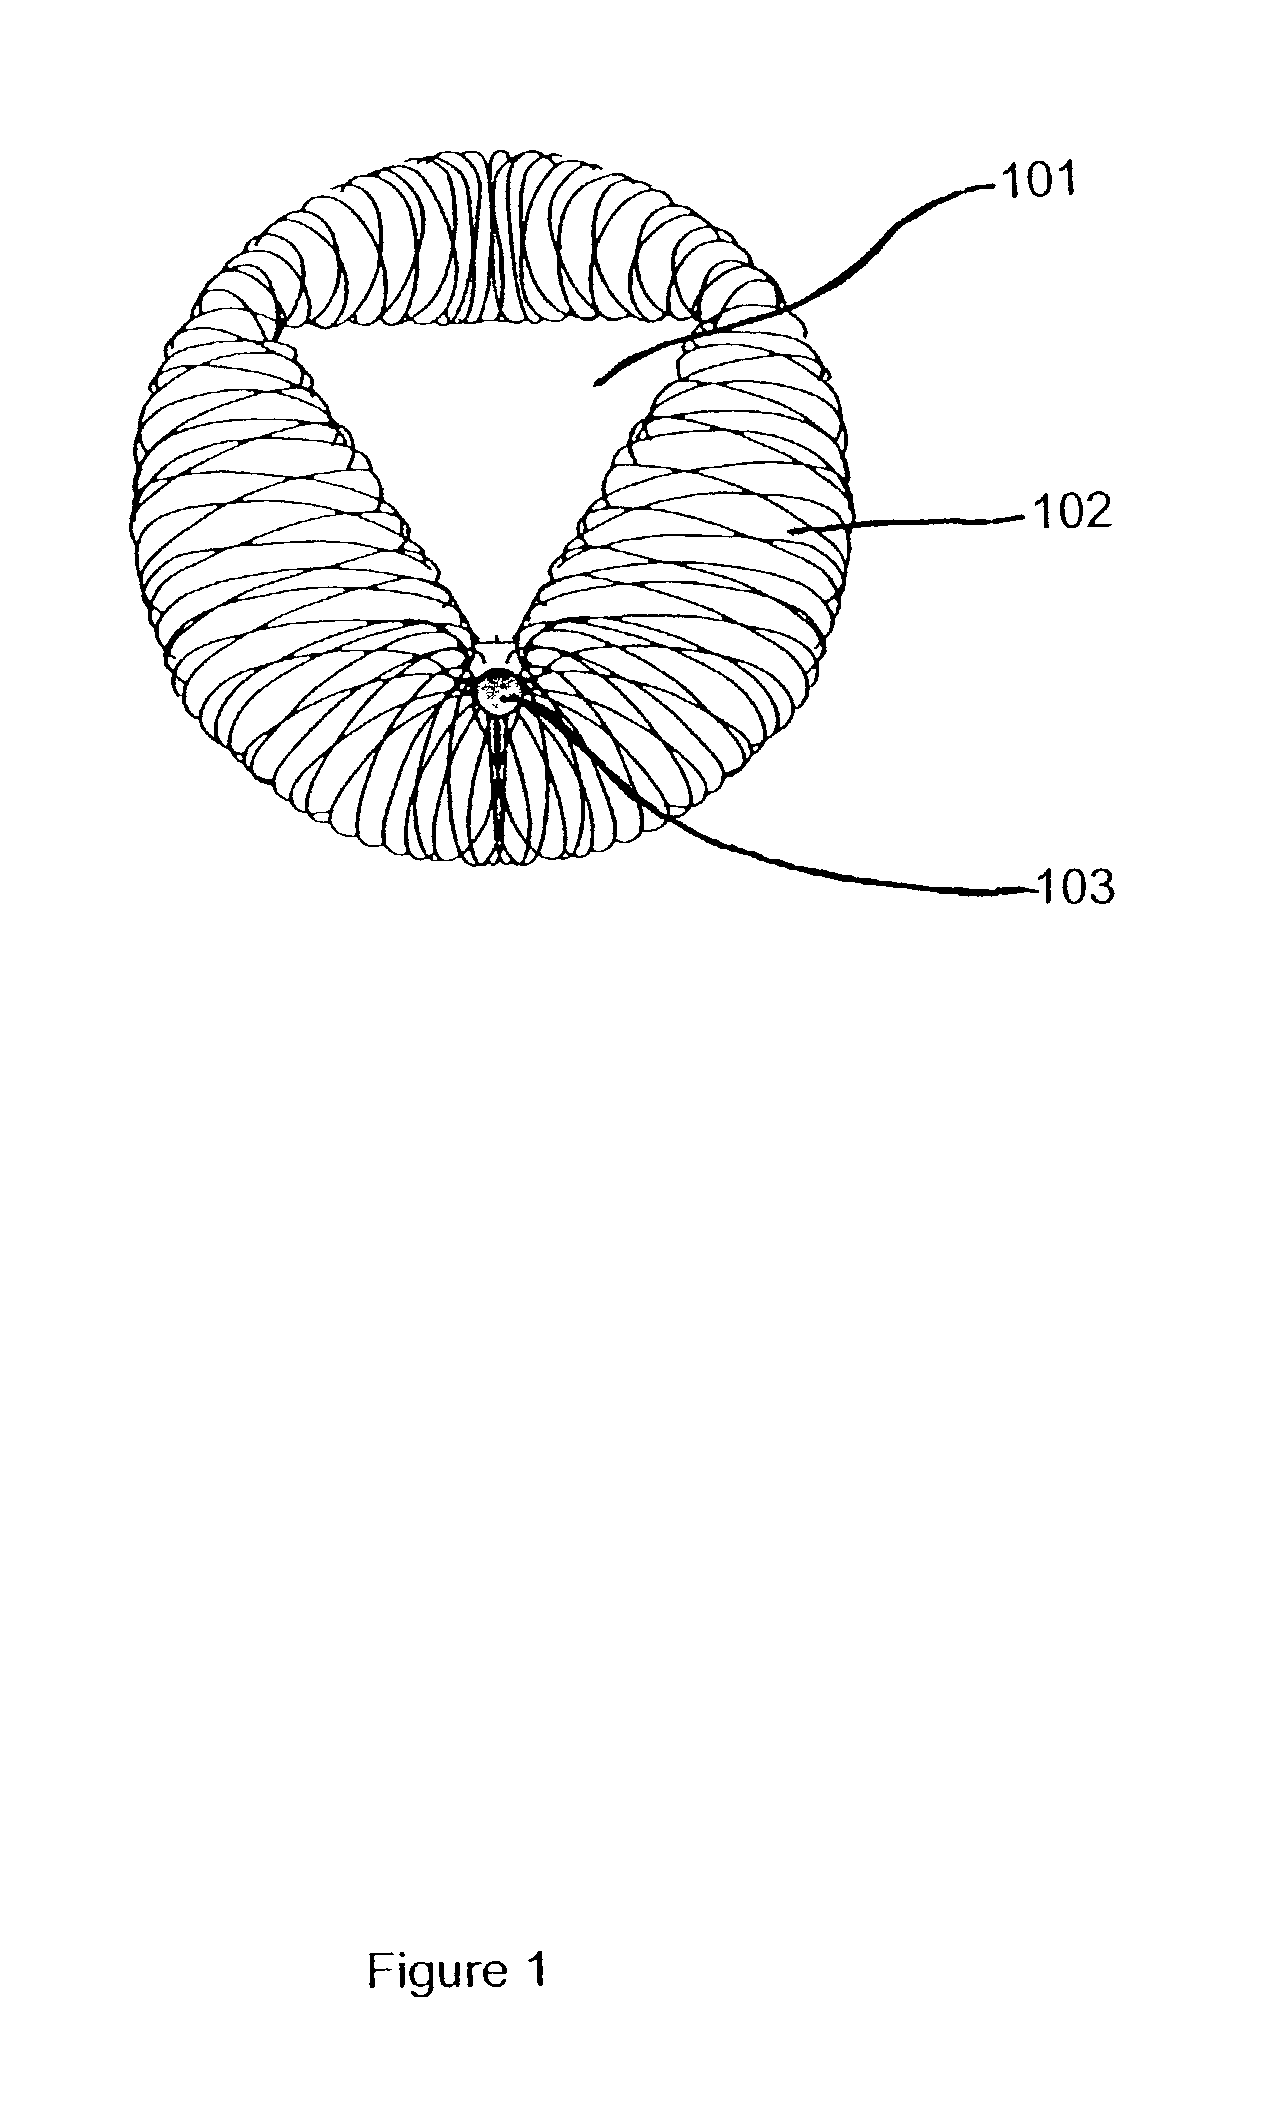 Catheter deployed partial occlusion devices and methods